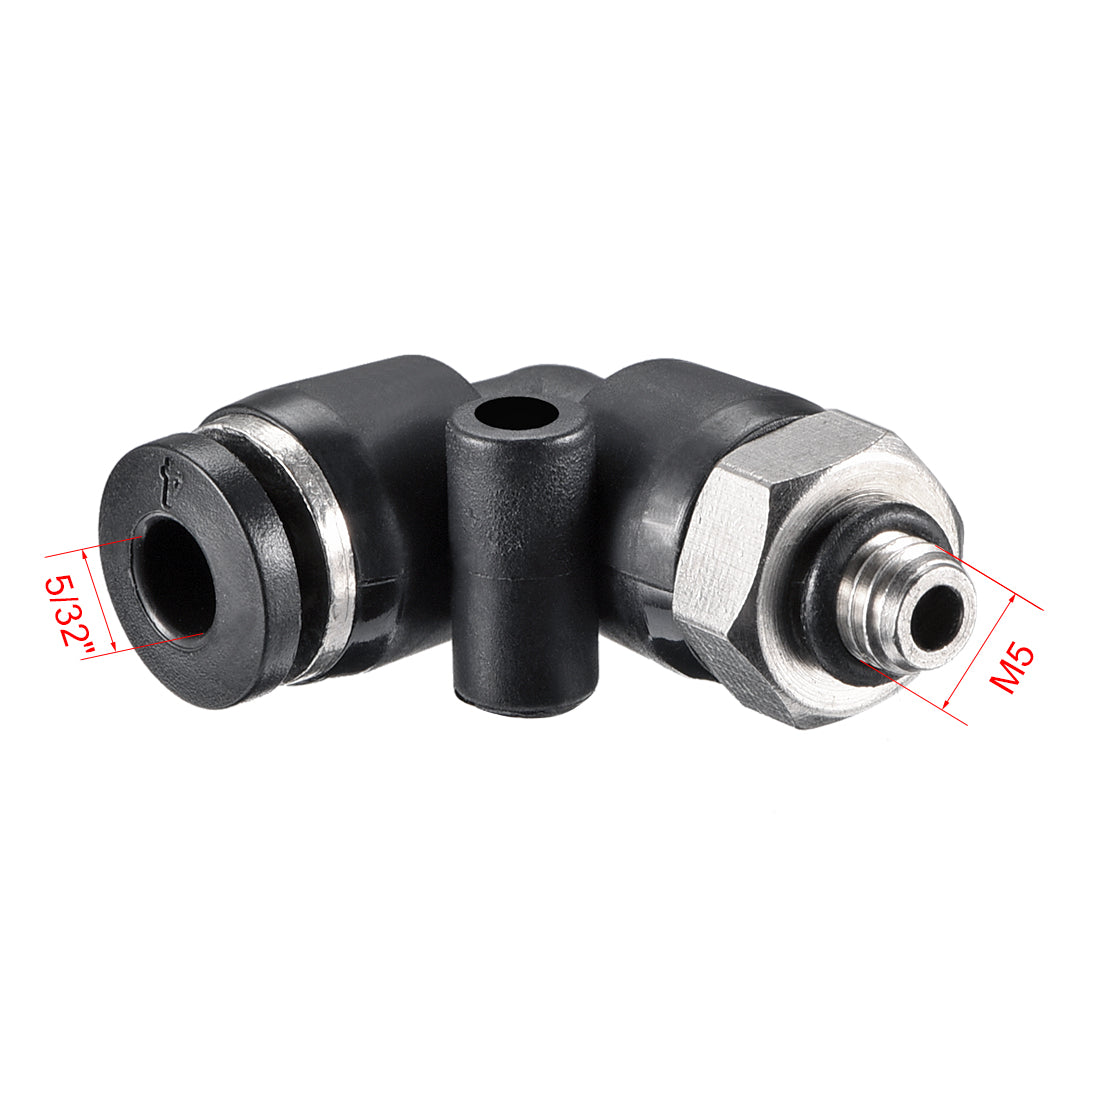 uxcell Uxcell PL4-M5 Pneumatic Push to Connect Fitting, Male Elbow - 5/32" Tube OD x M5 Thread  Tube Fitting 4pcs